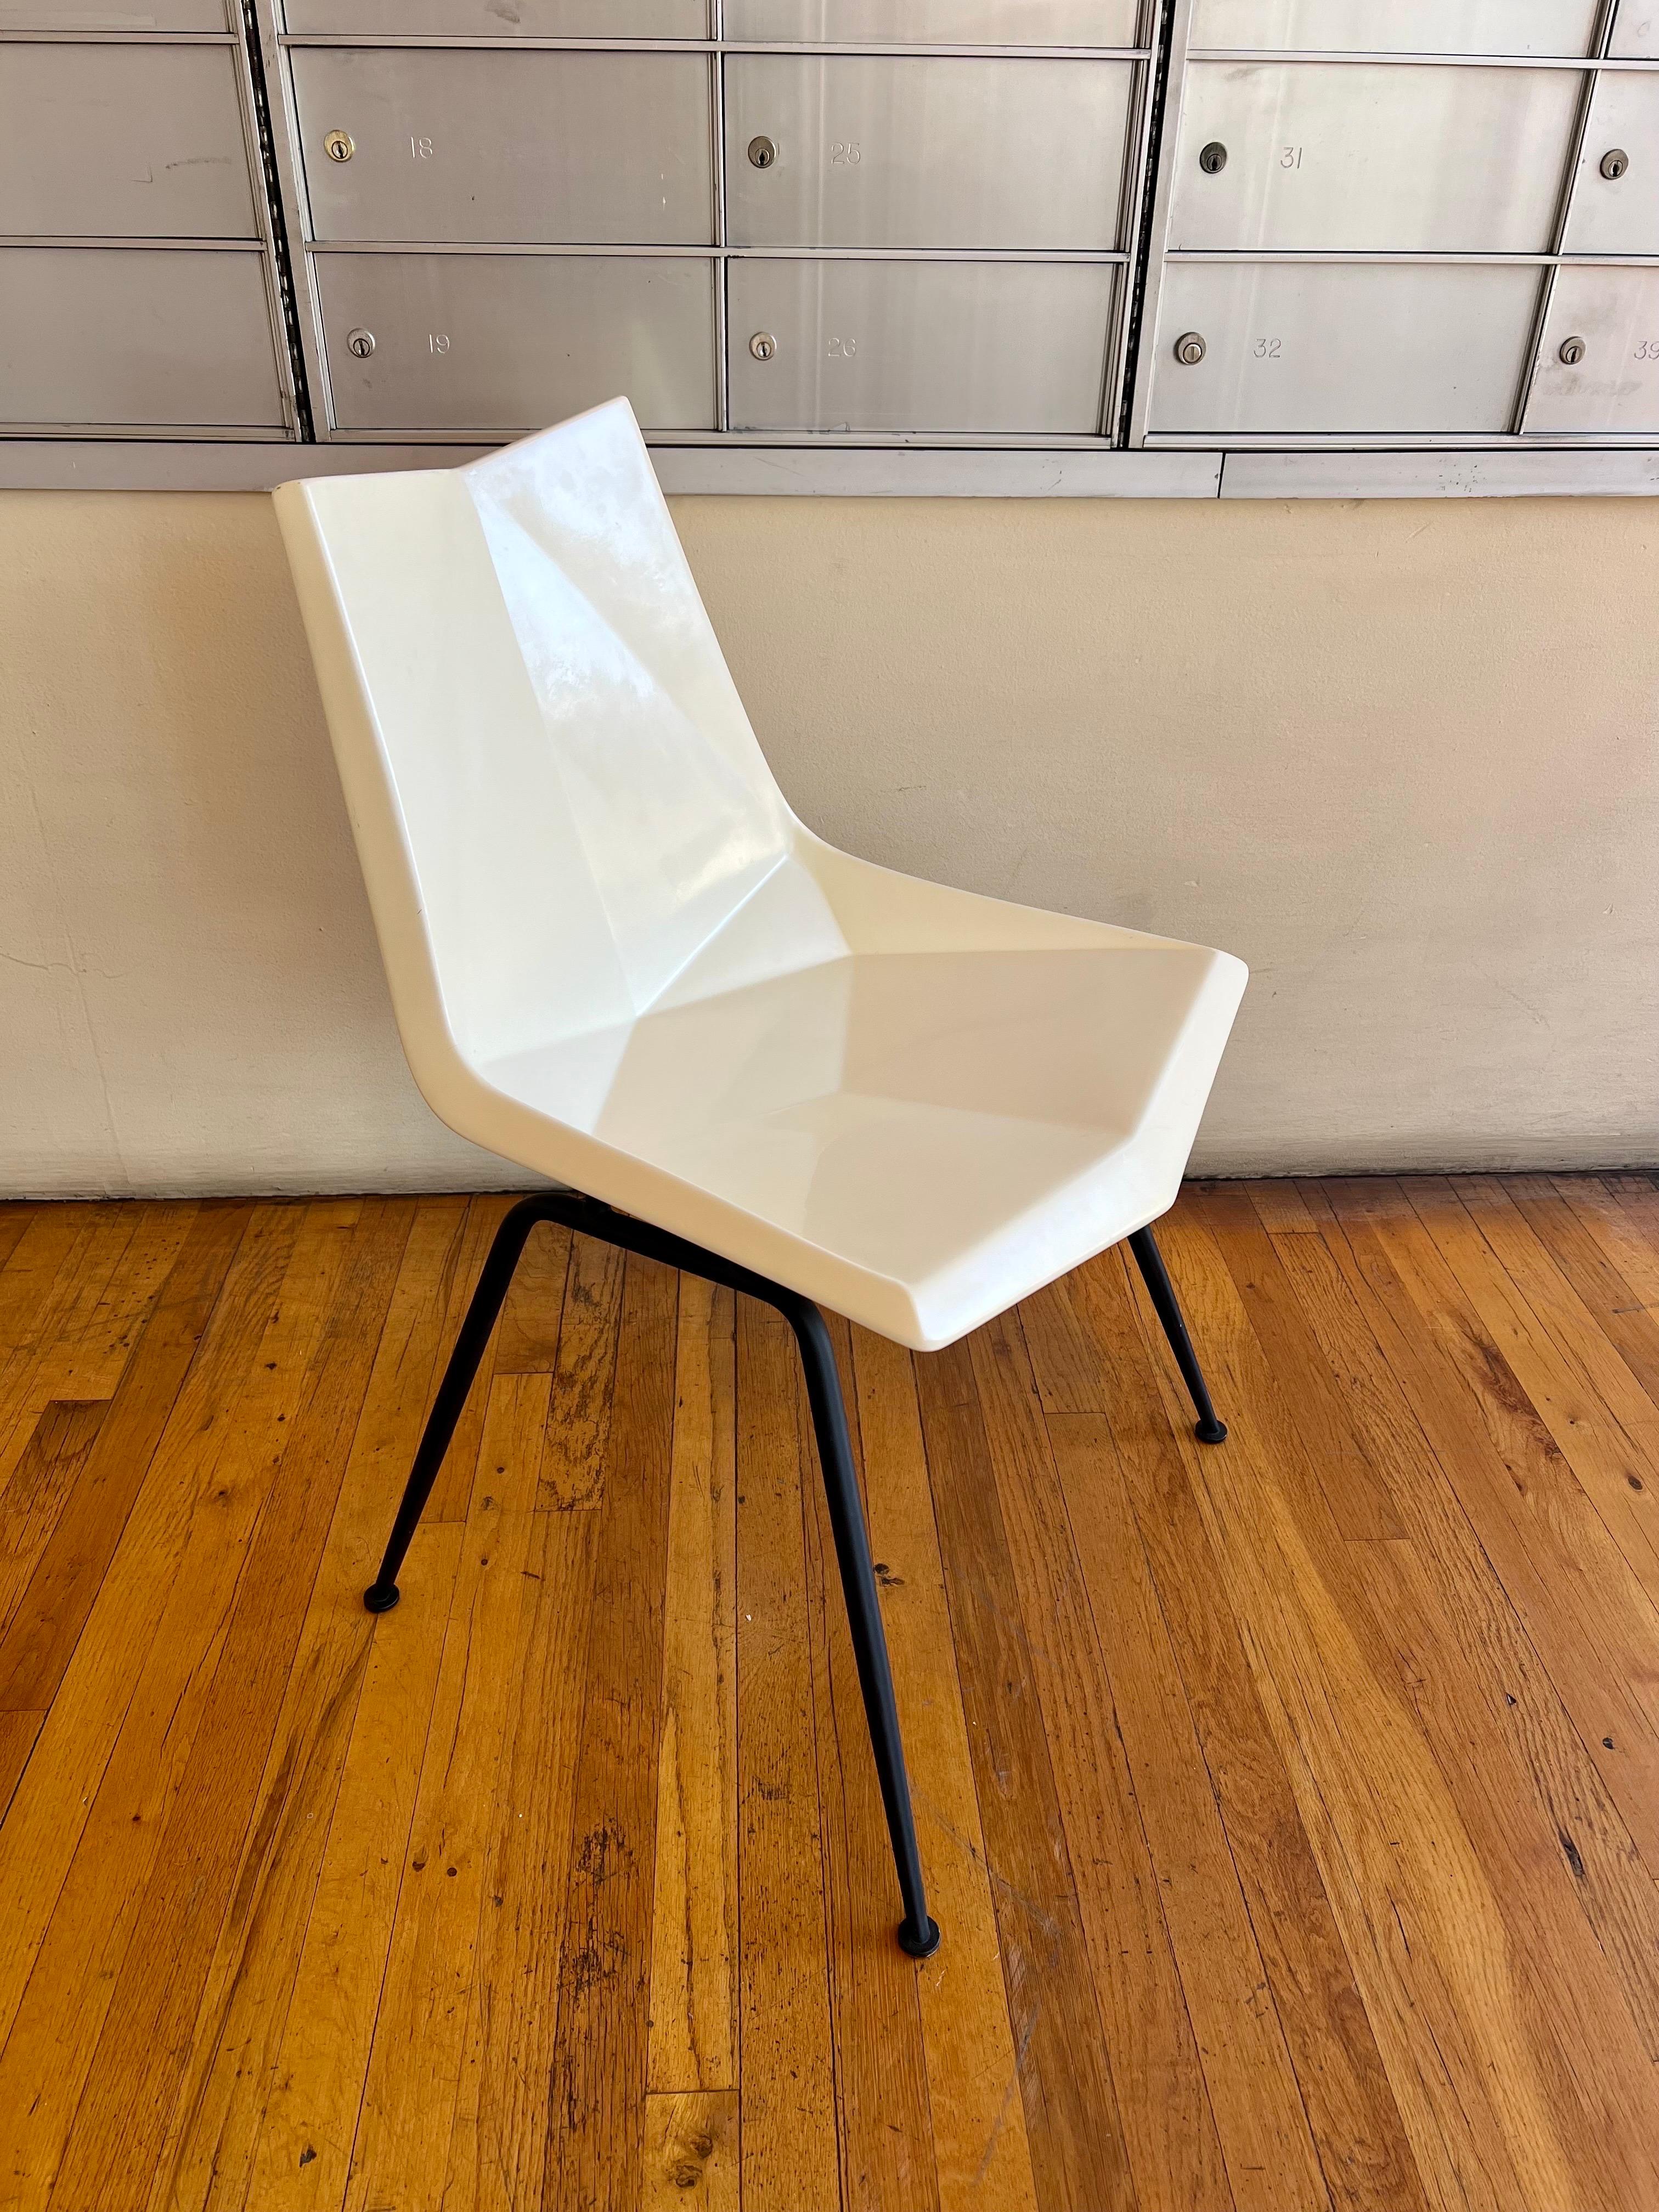 Paul McCobb Origami Ivori Desk Patio Chair Model 61 In Excellent Condition For Sale In San Diego, CA